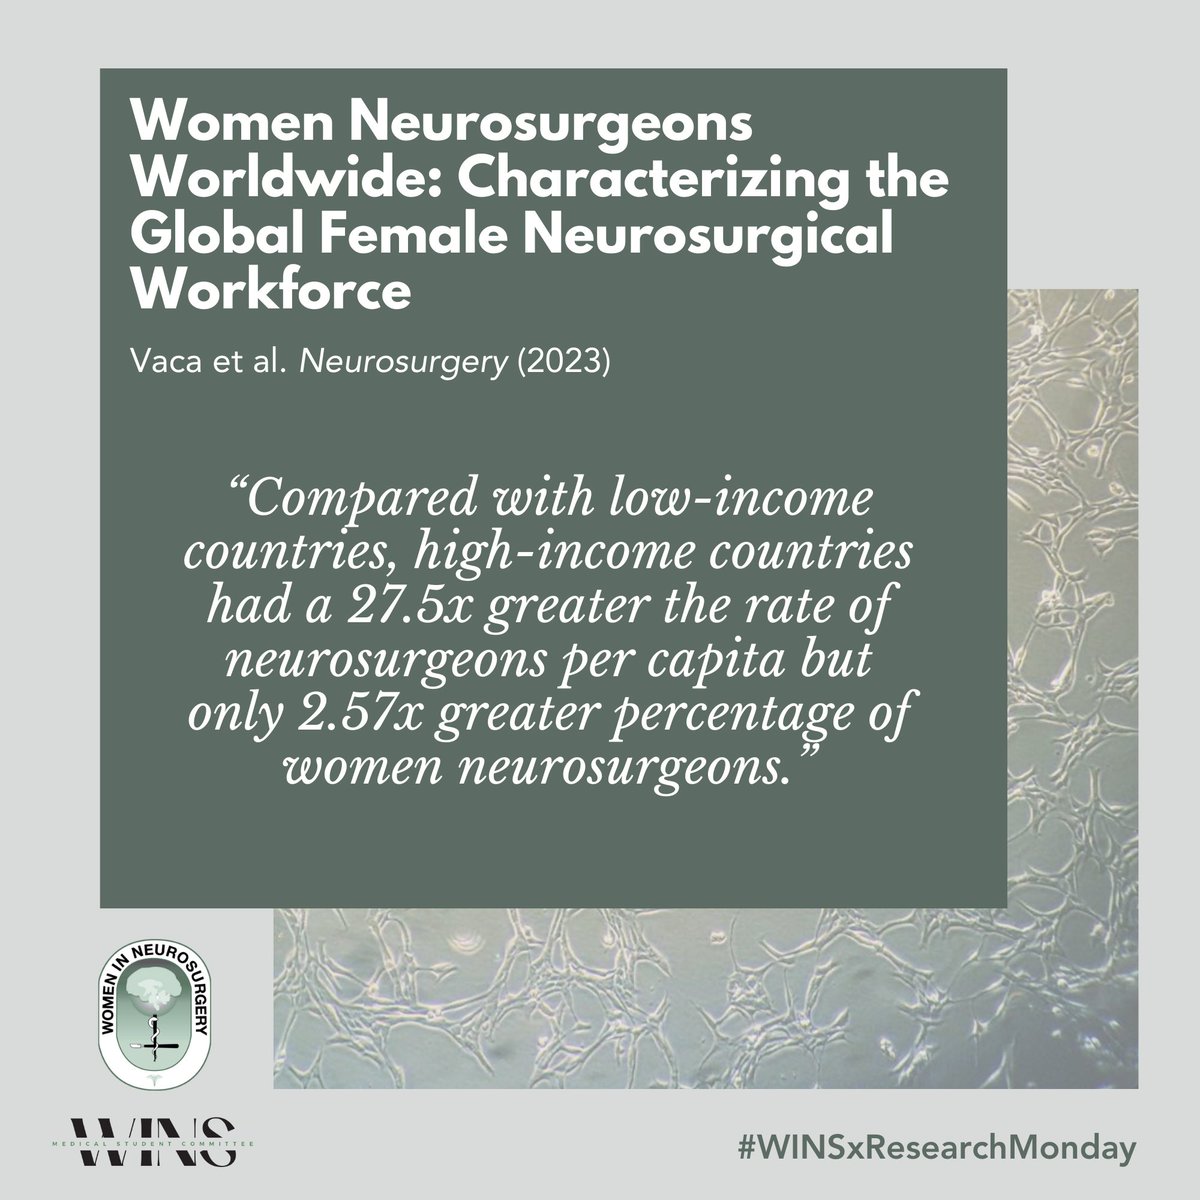 This new study by collaborators from @StanfordNsurg and @UOC_gr characterizes the global female neurosurgical workforce, with notable findings including Africa having the fewest neurosurgeons yet highest percentage of women neurosurgeons #globalneurosurgery #WINSxResearchMonday